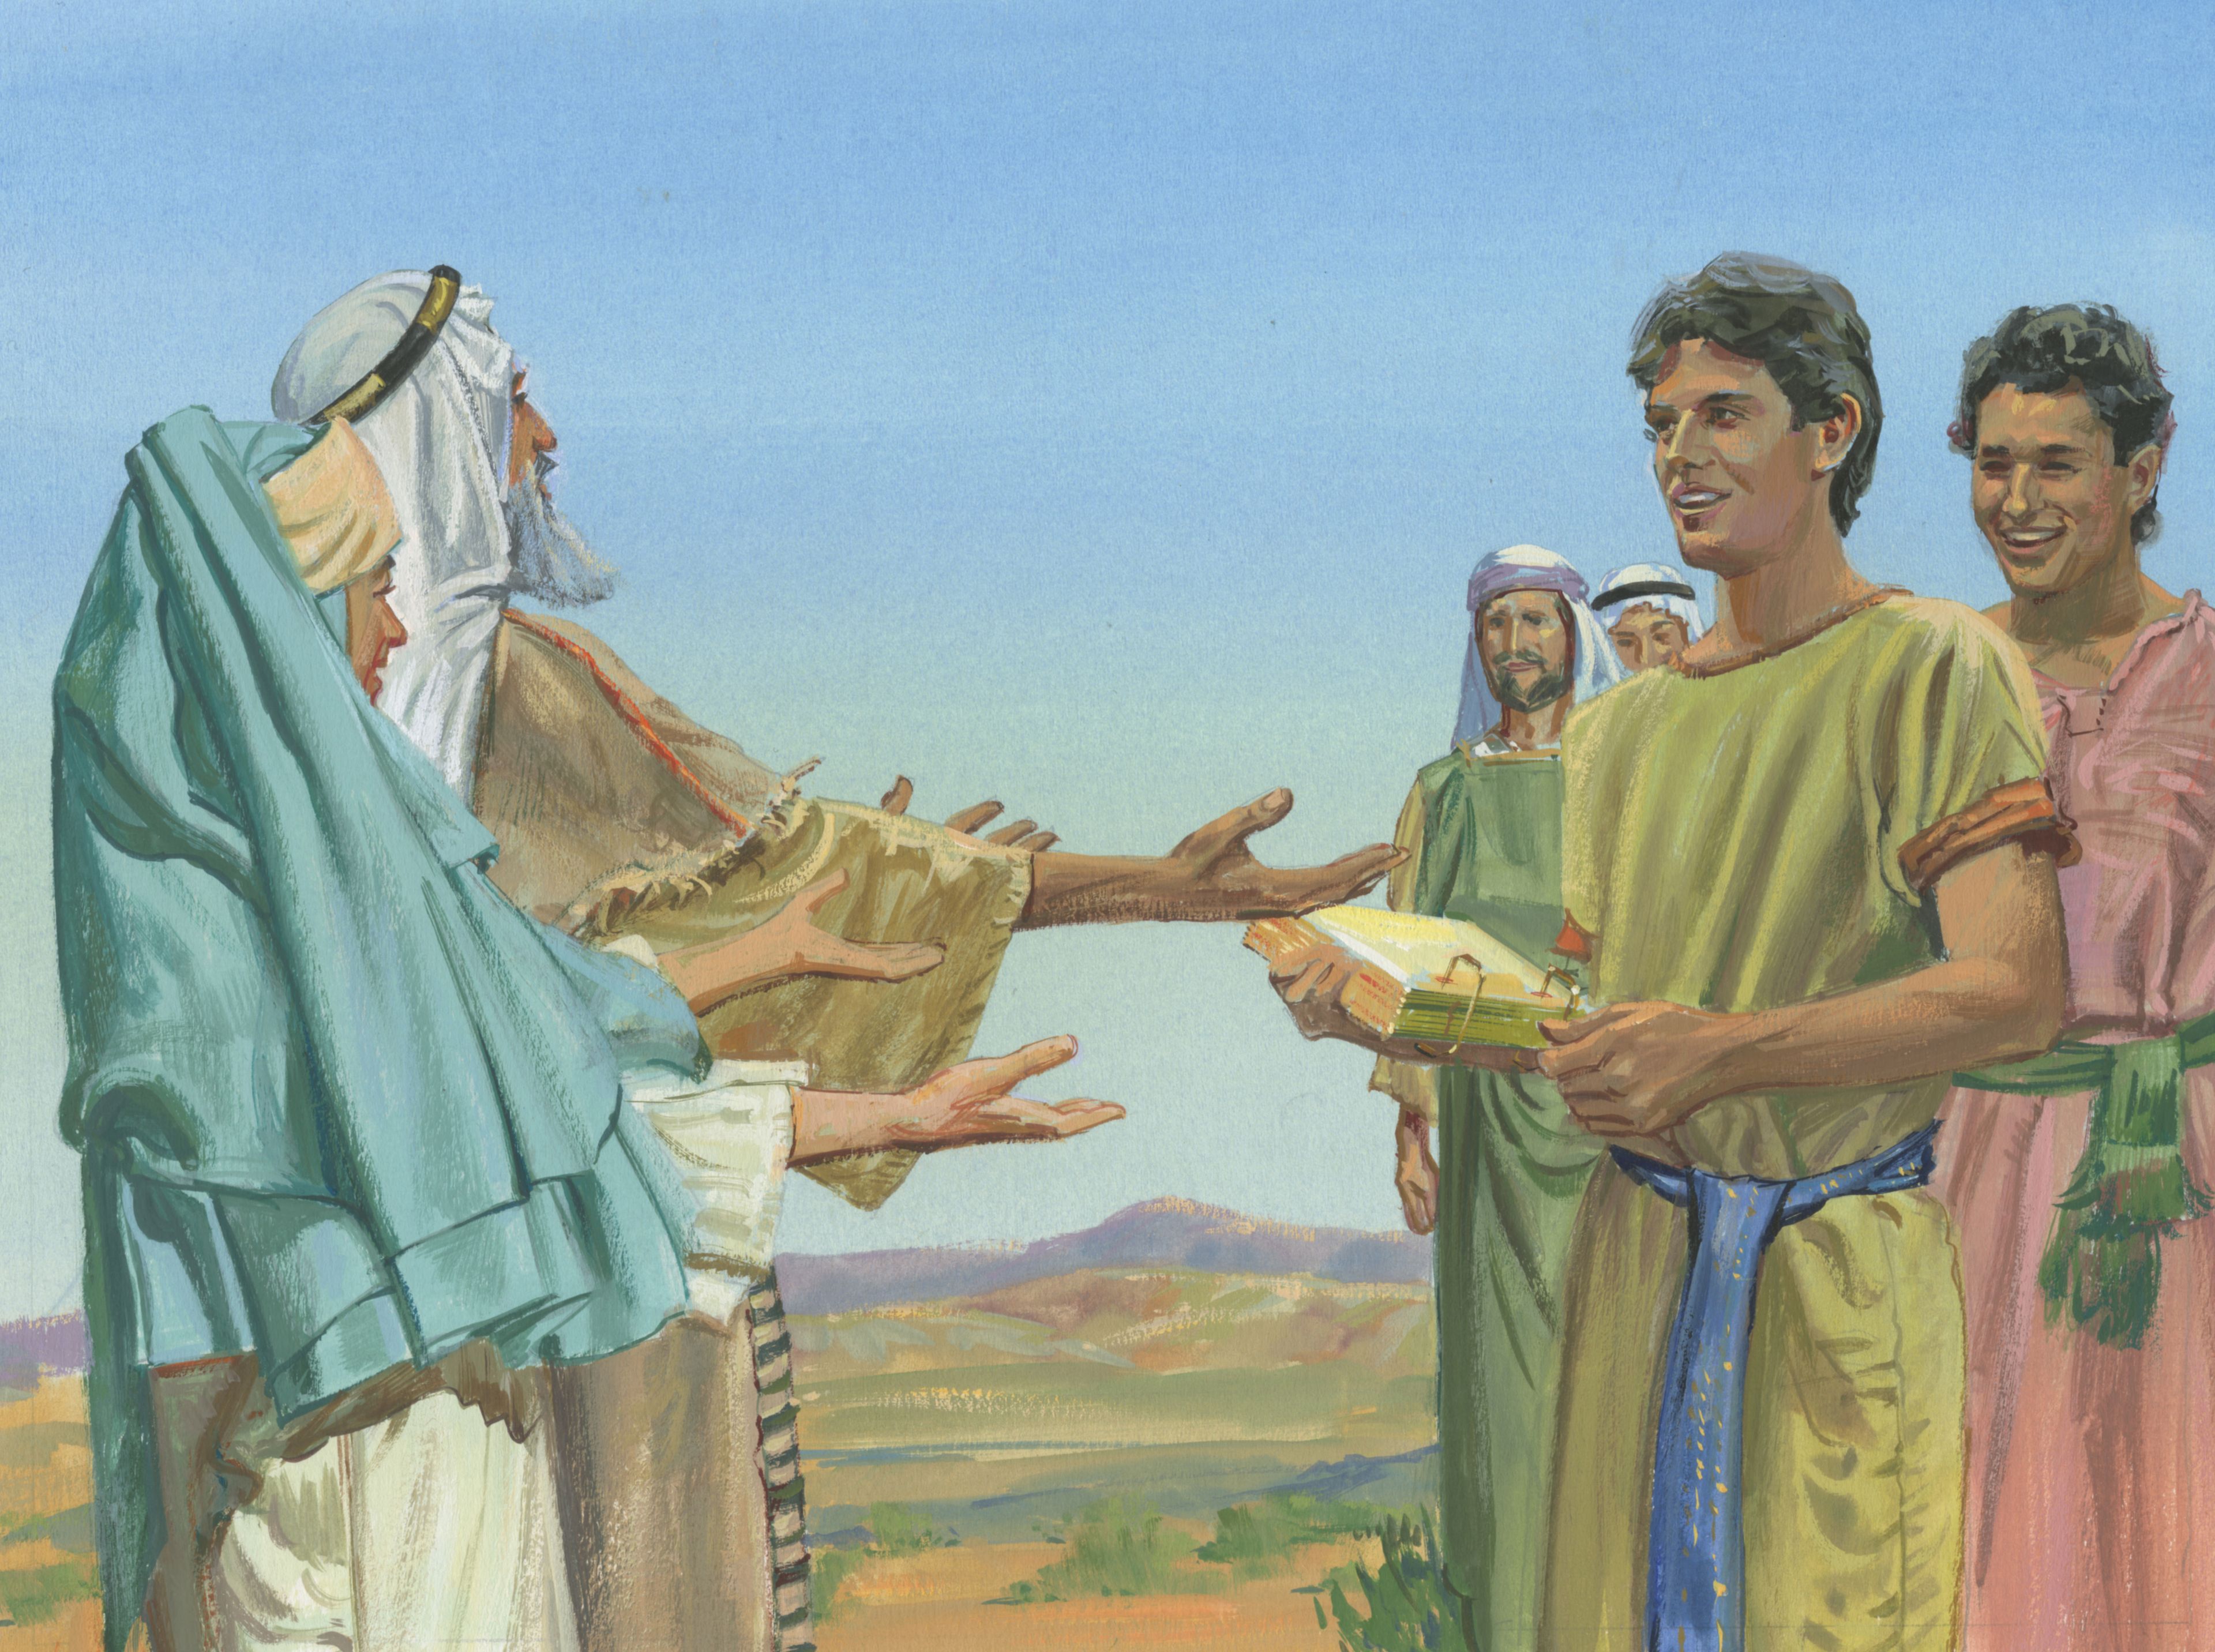 A painting by Jerry Thompson depicting Nephi returning to Lehi with the brass plates; Primary manual 4-8